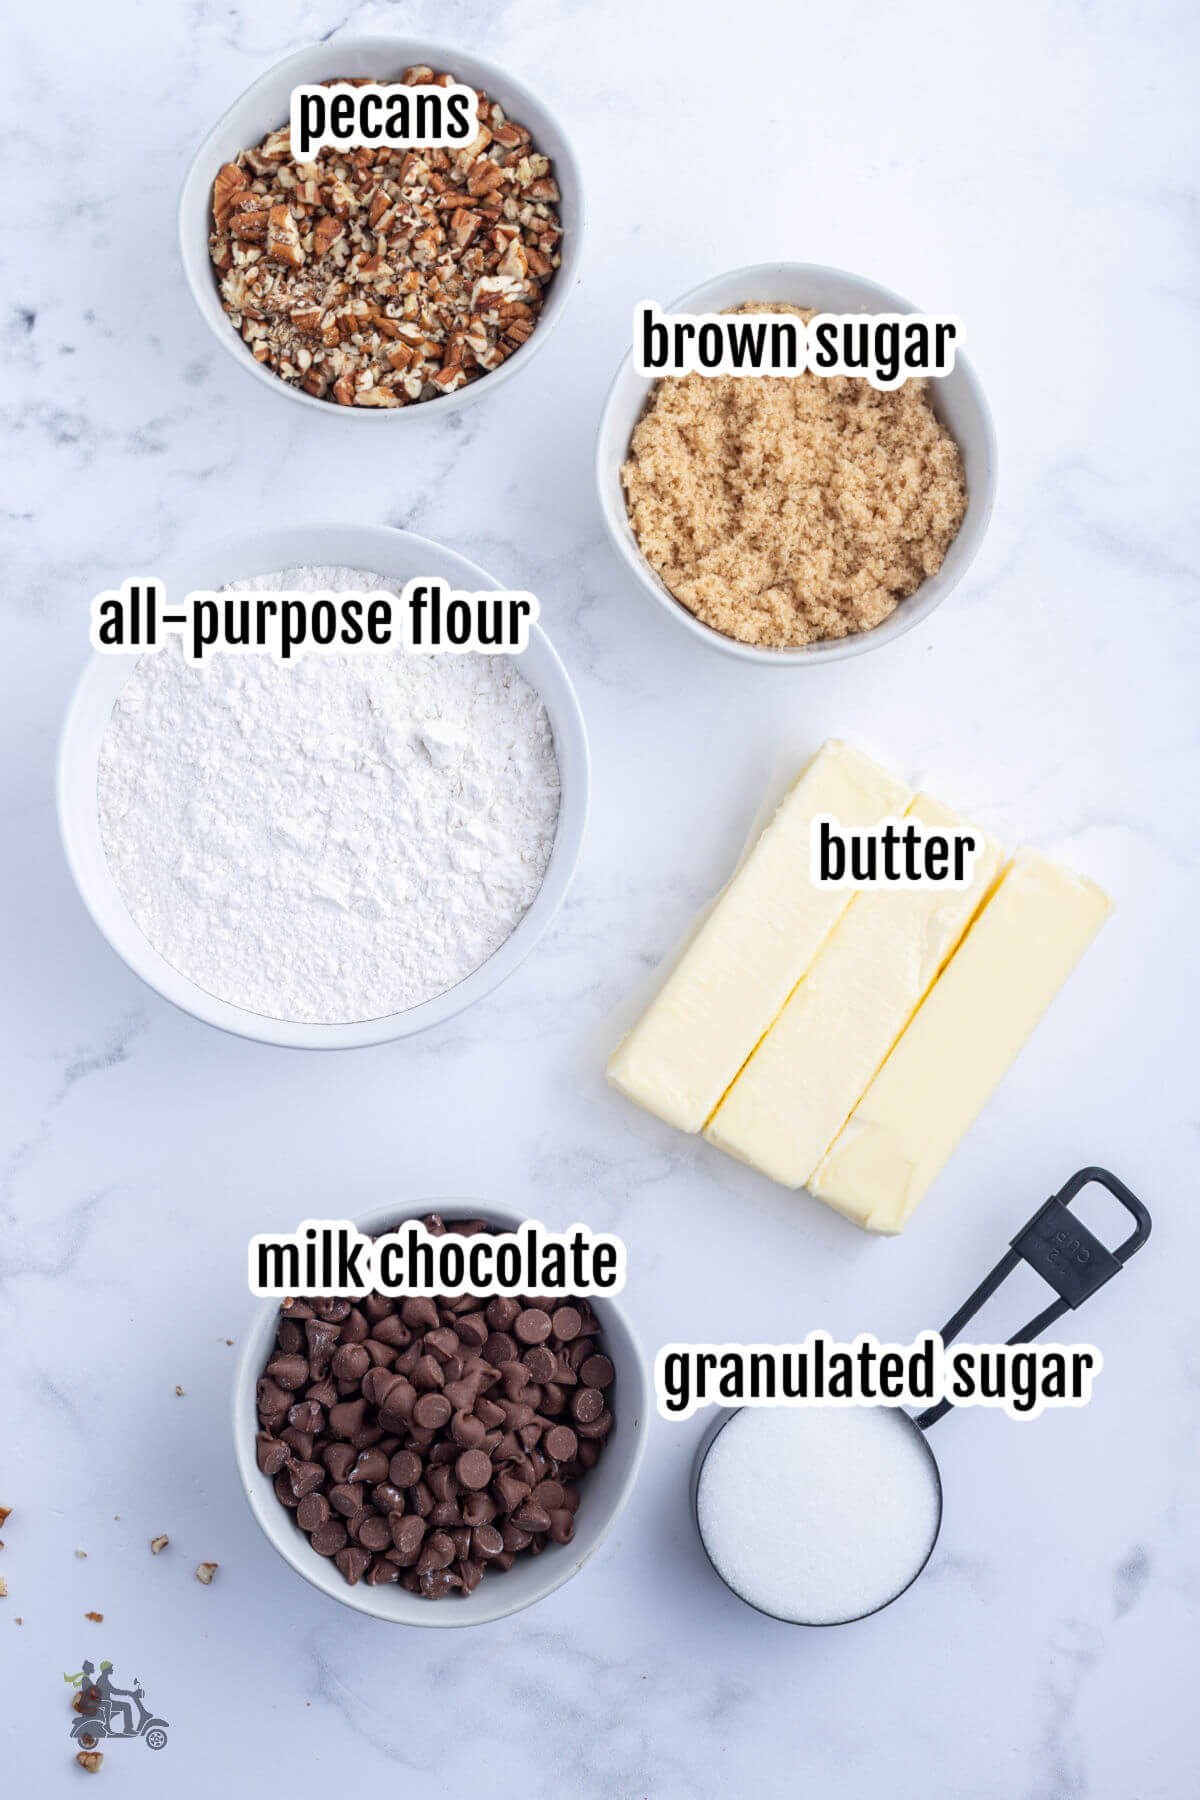 Image of the ingredients needed for making the Turtle Caramel Pecan Bars. 